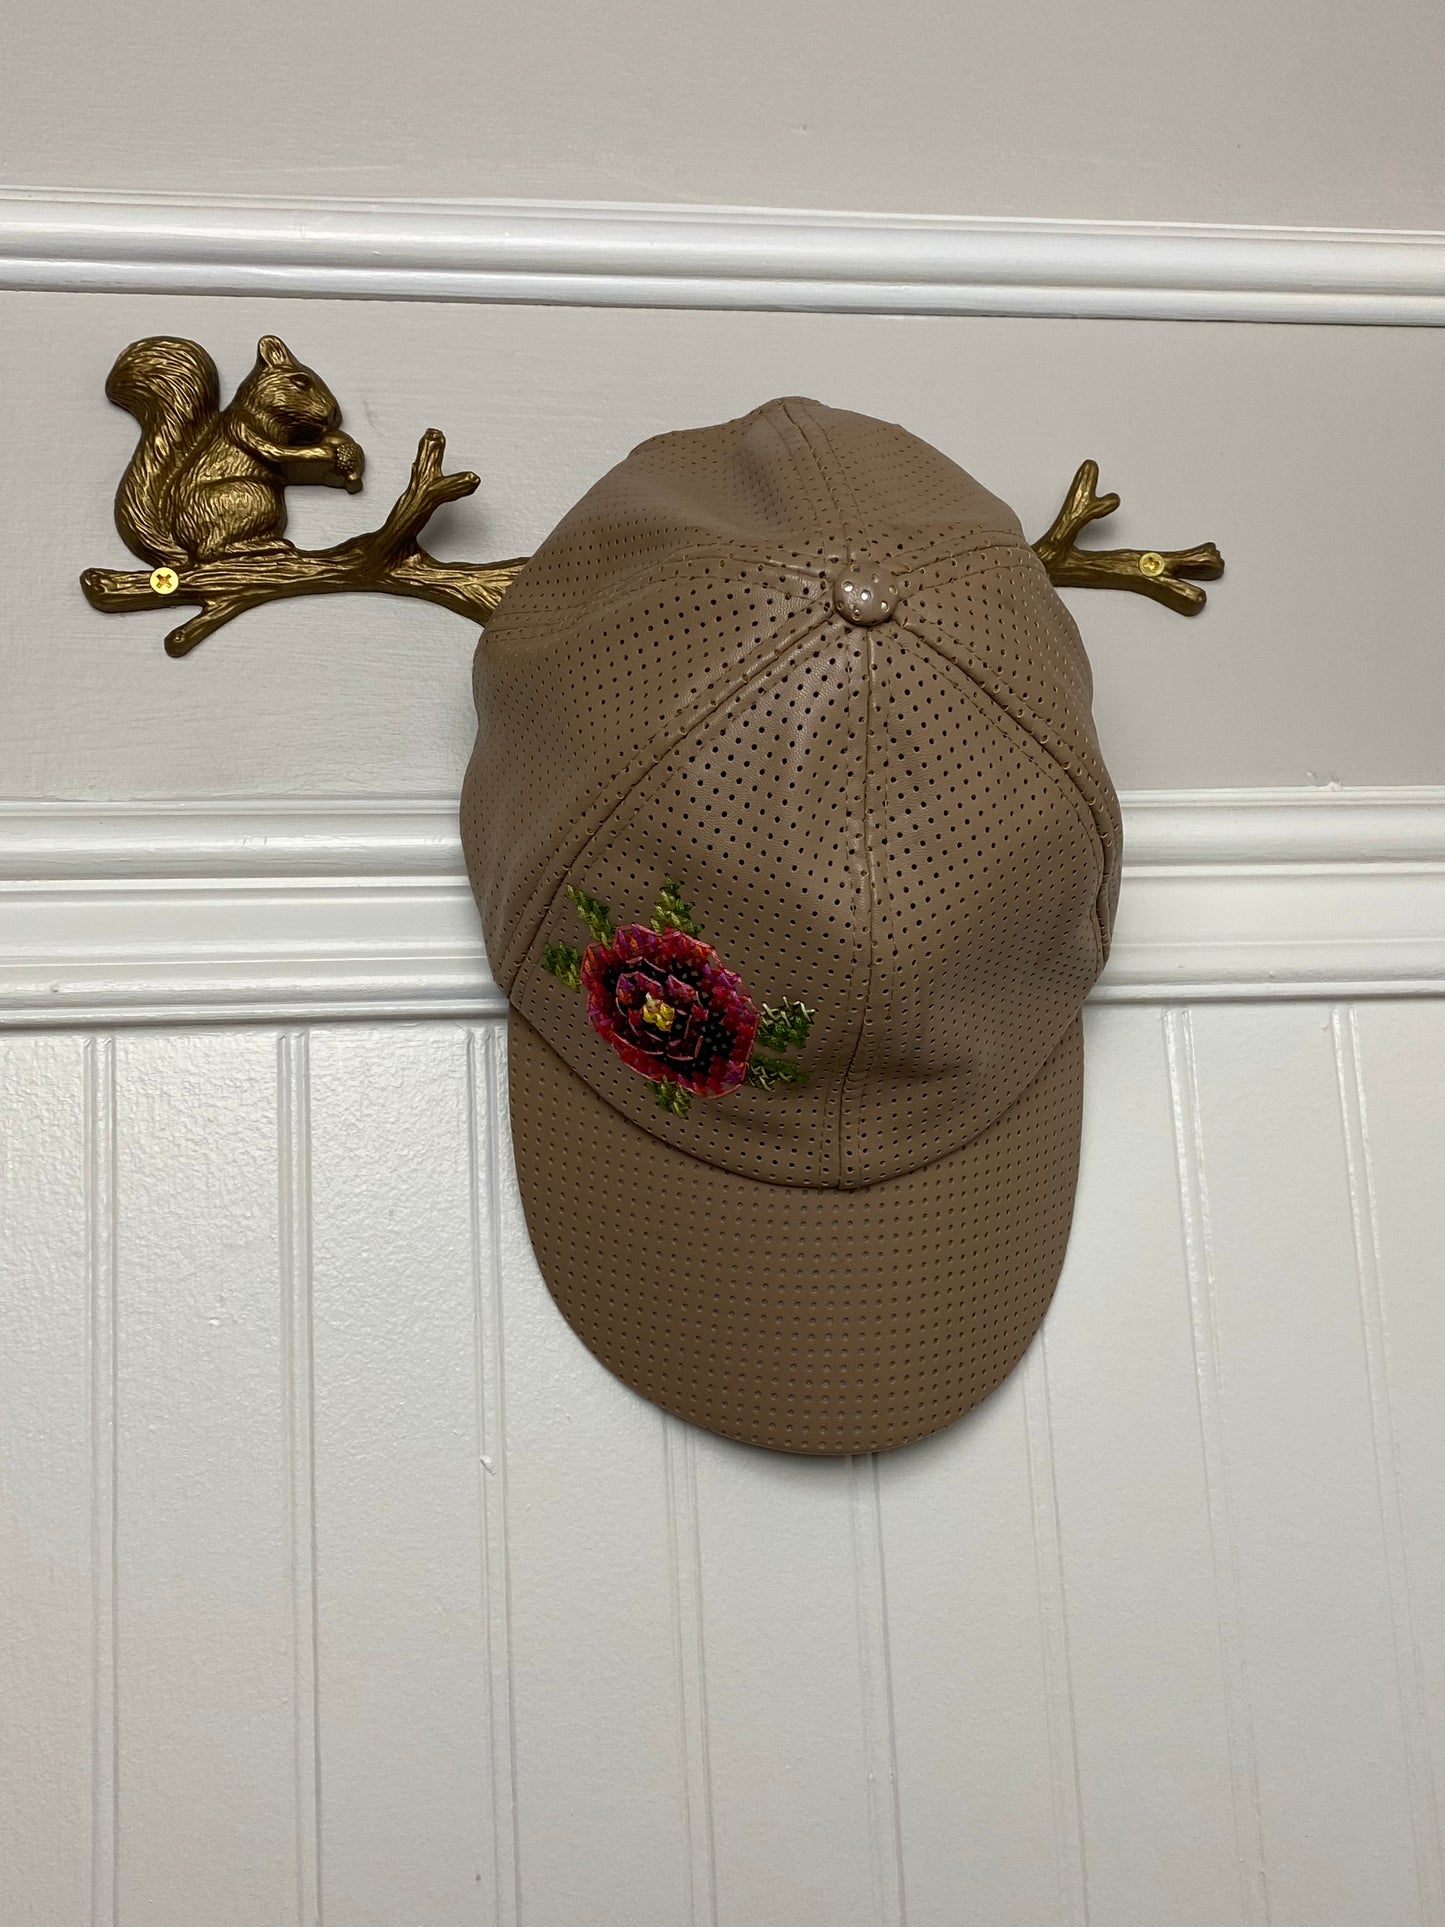 Tan perforated cap with floral cross stitched motif.